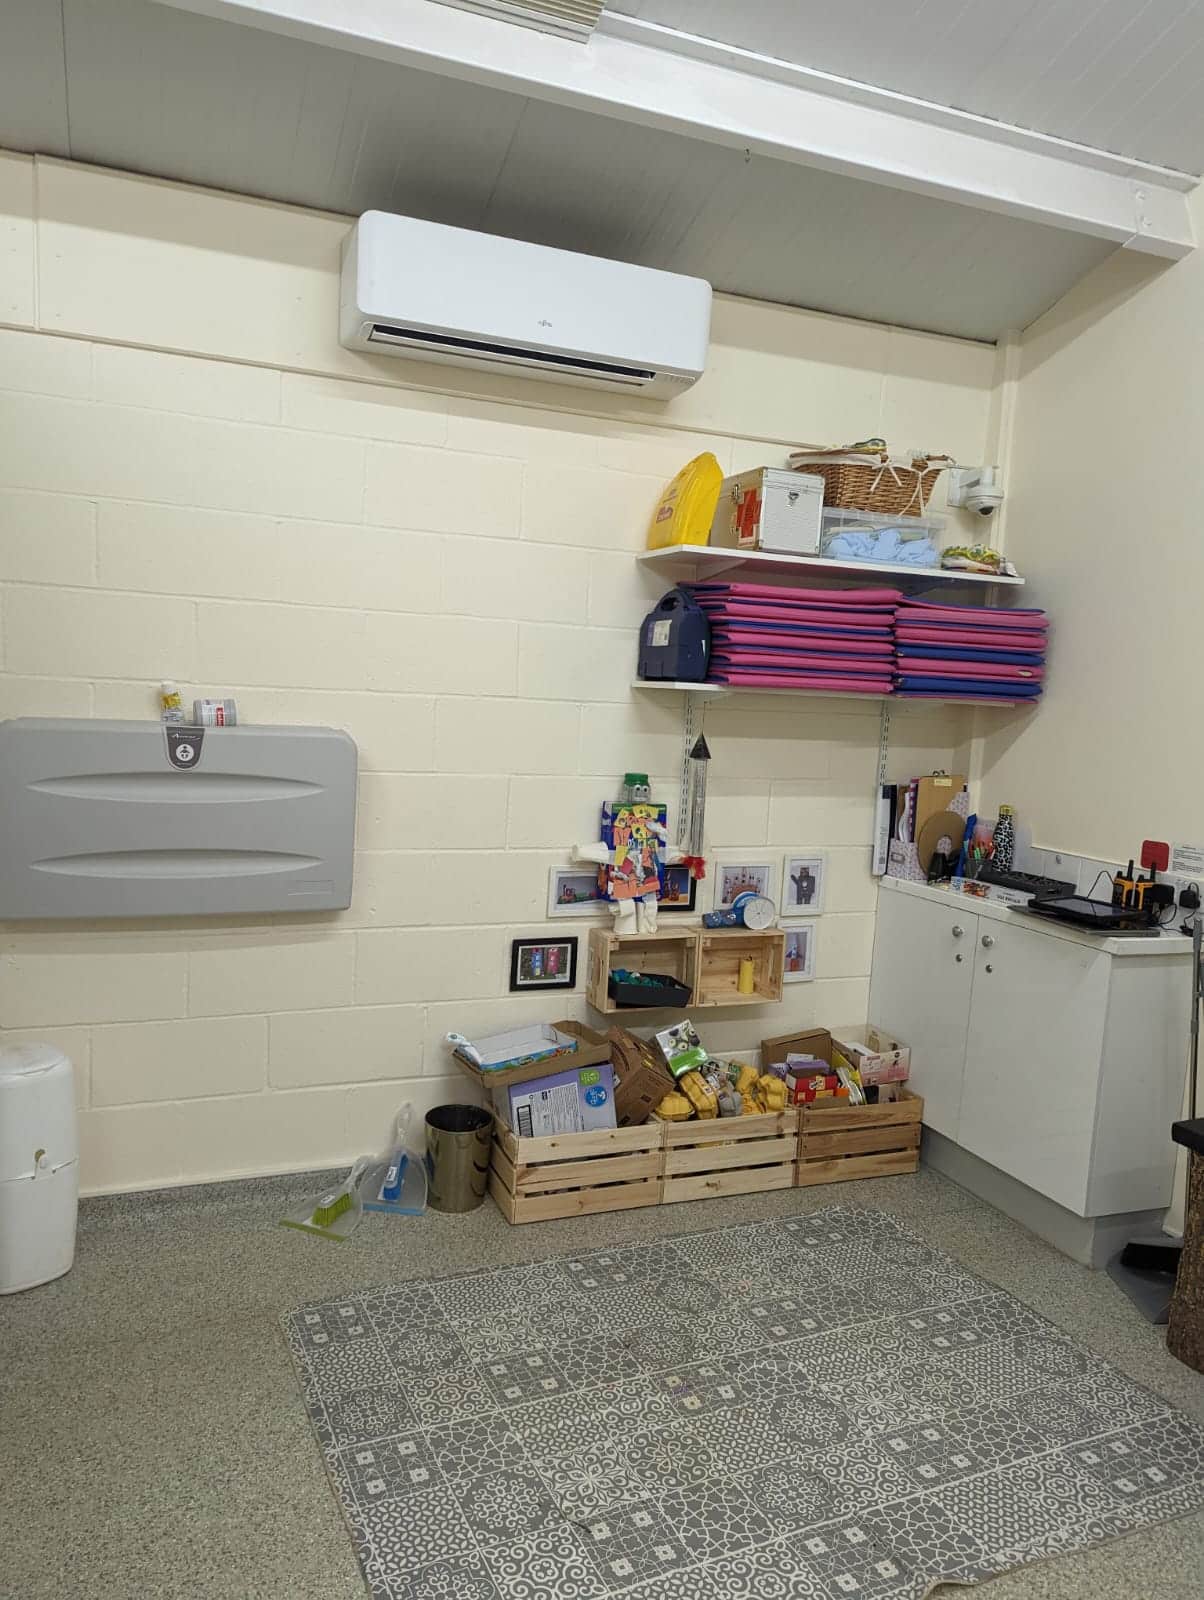 AAC Blogs - New Air Conditioning Installation in Splat Nursery